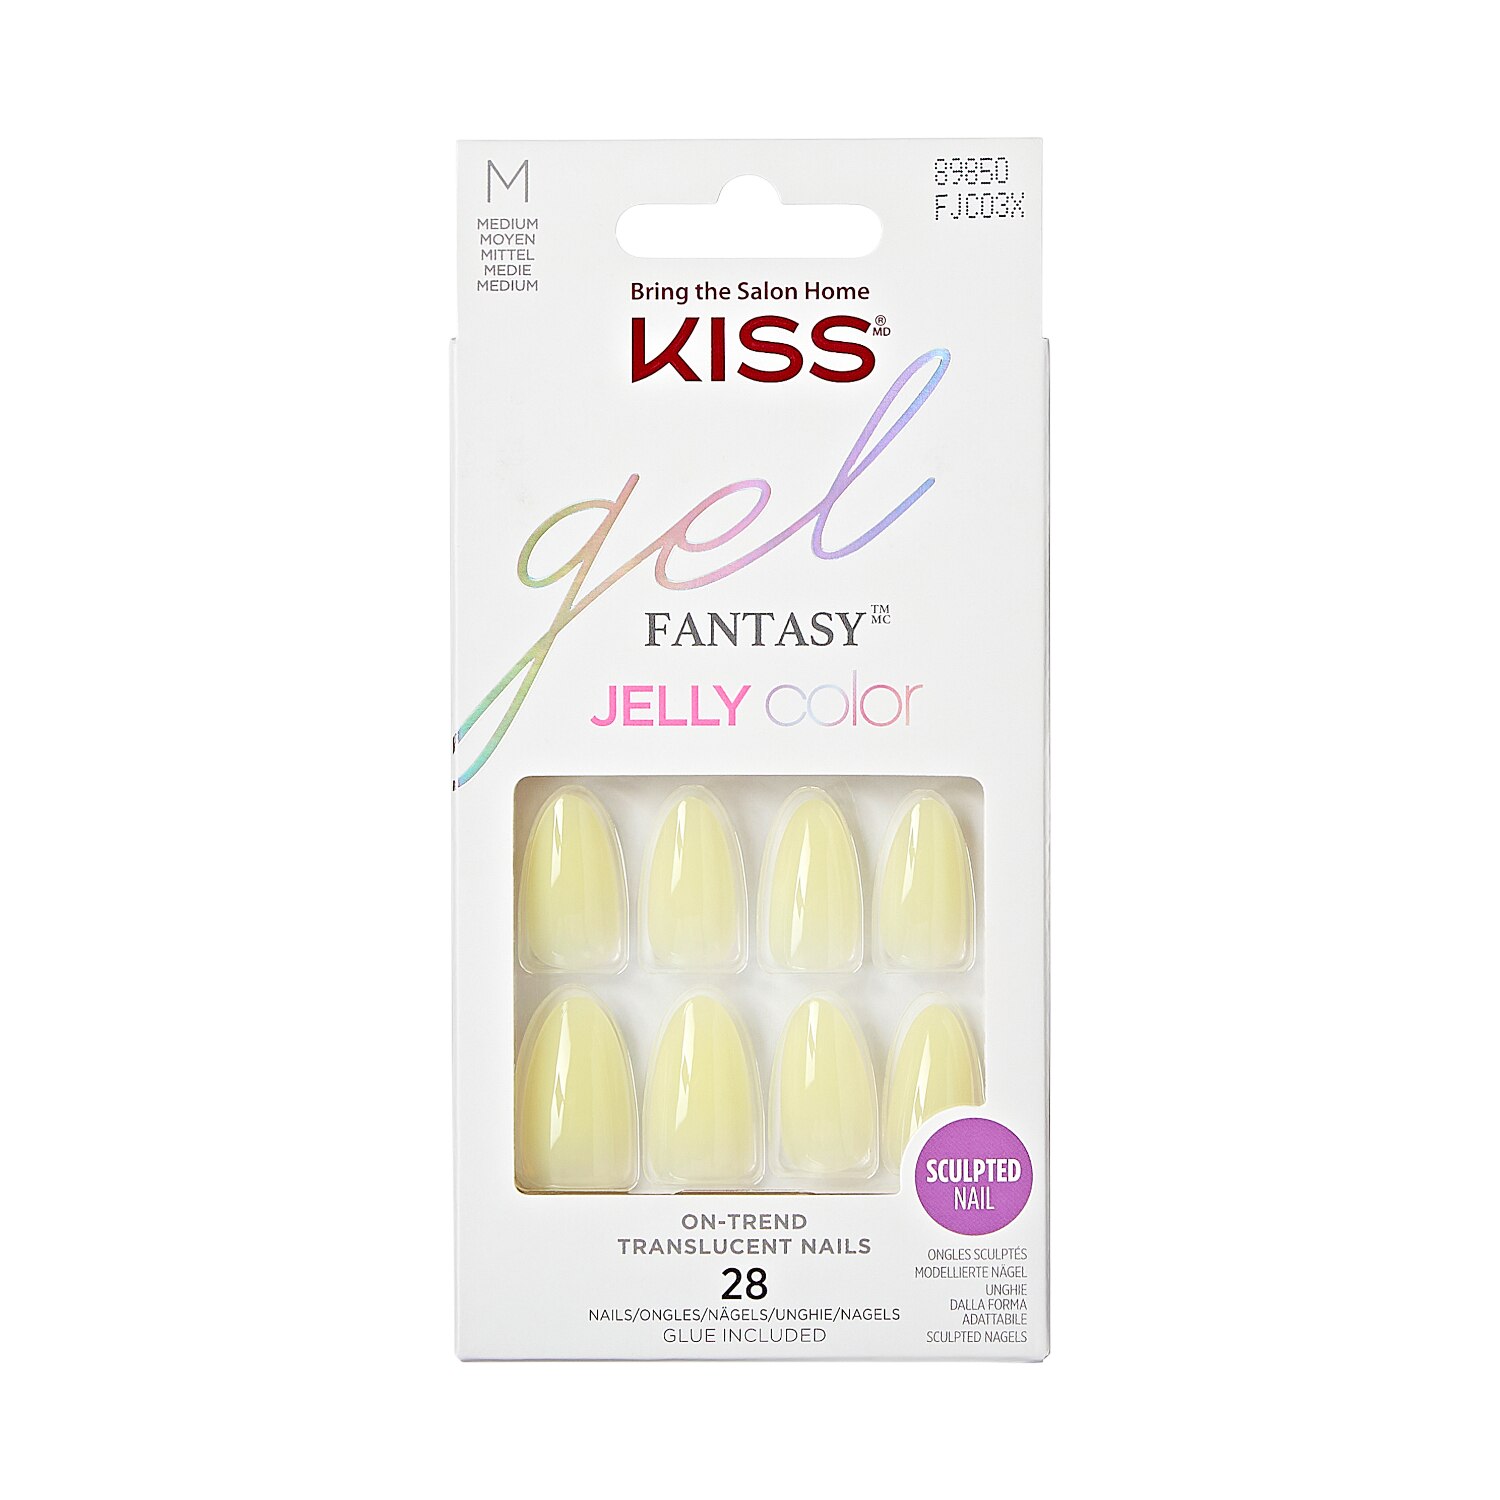 KISS Gel Fantasy Jelly Color Press-on Nails, Solid Yellow - 4ever Jelly , CVS